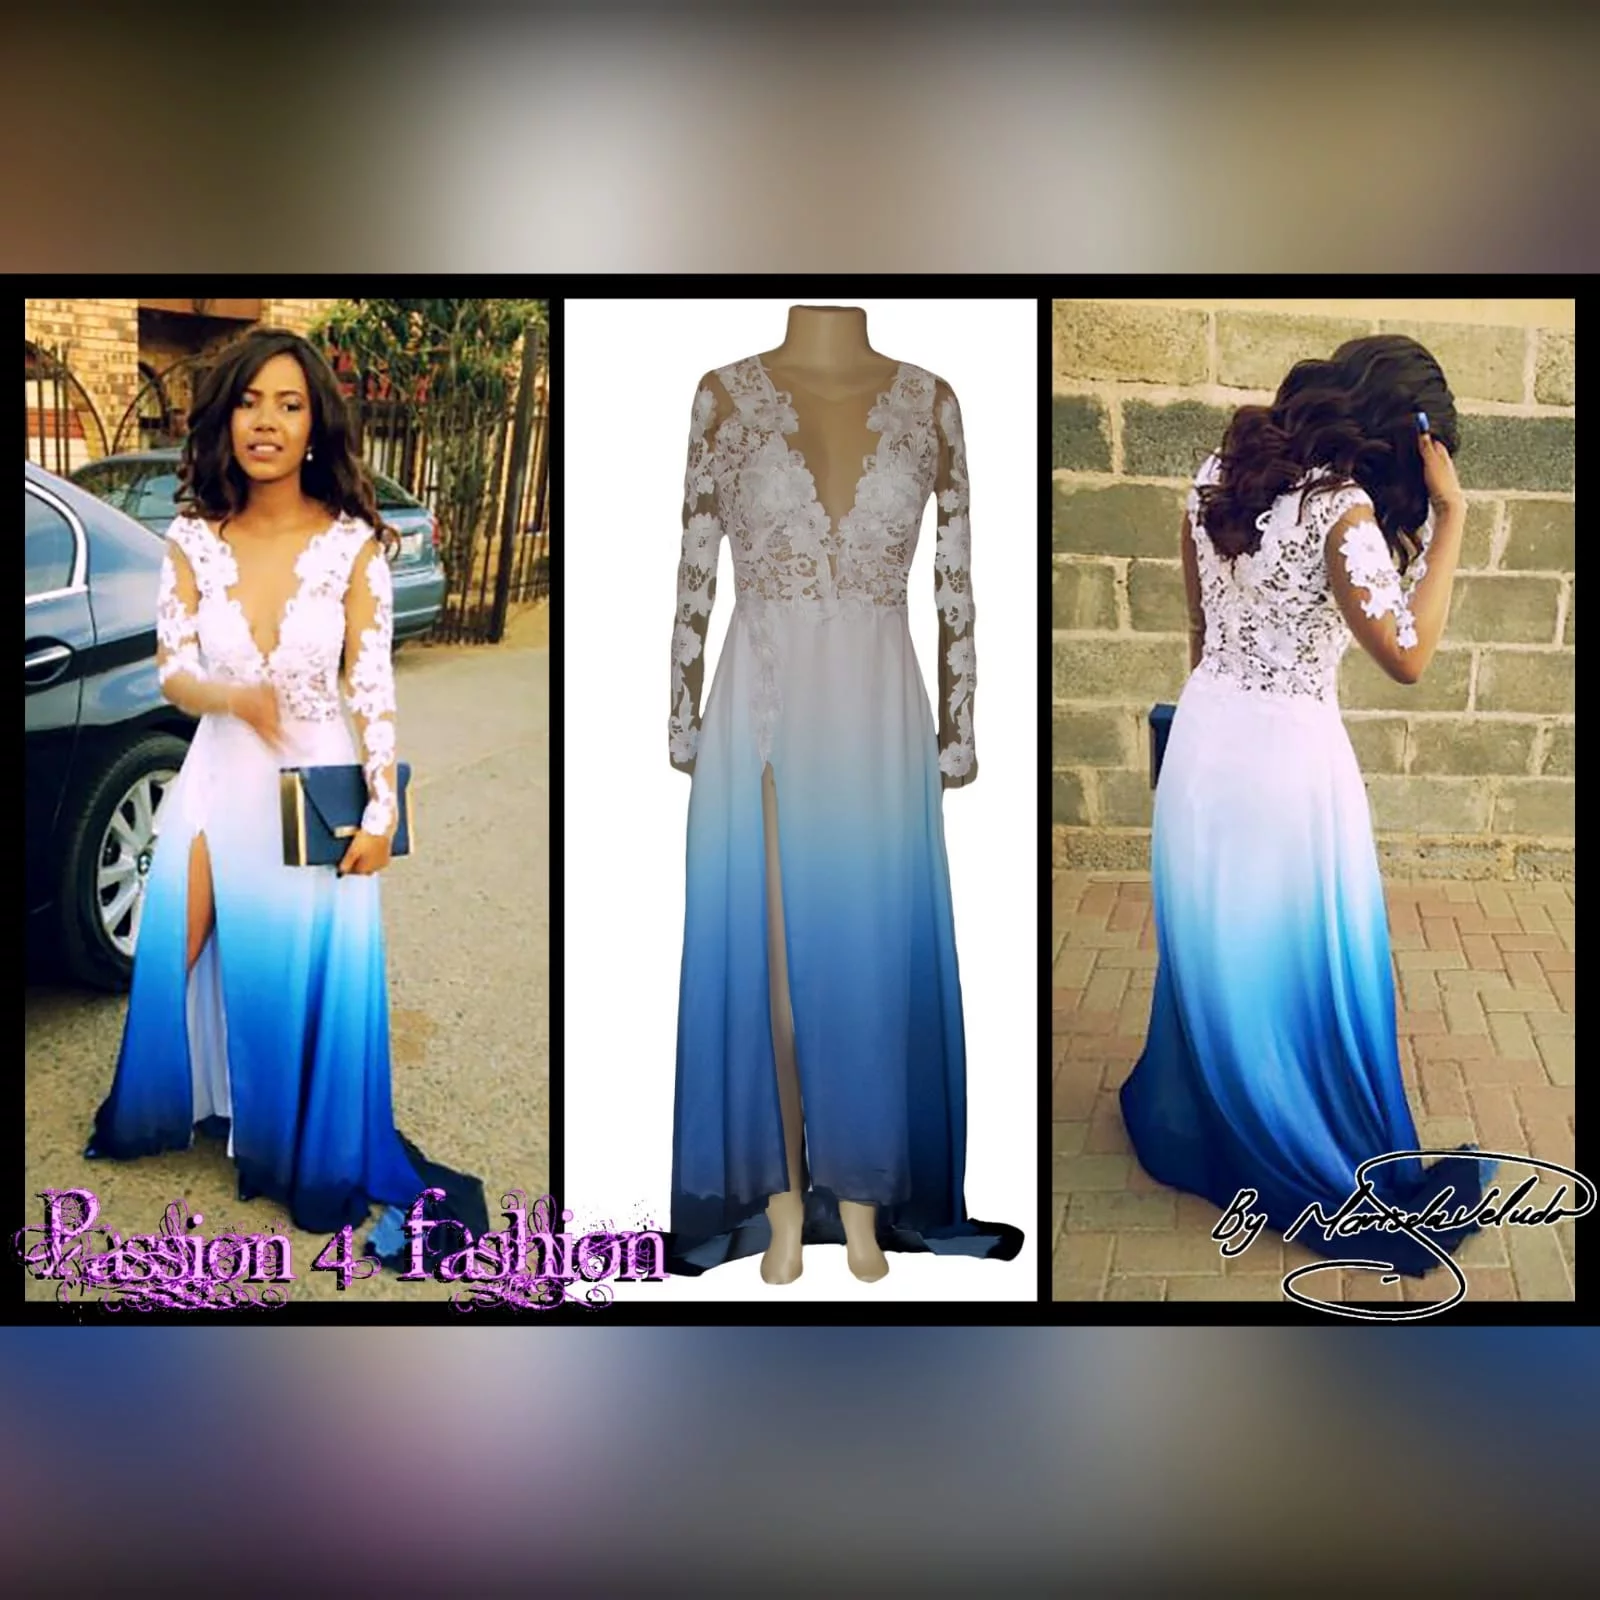 Gorgeous blue and white ombre flowy ceremony dress 3 a gorgeous blue and white ombre flowy ceremony dress created for a matric dance night. With a classy white bodice with elegant illusion lace sleeves. With a slit and a train